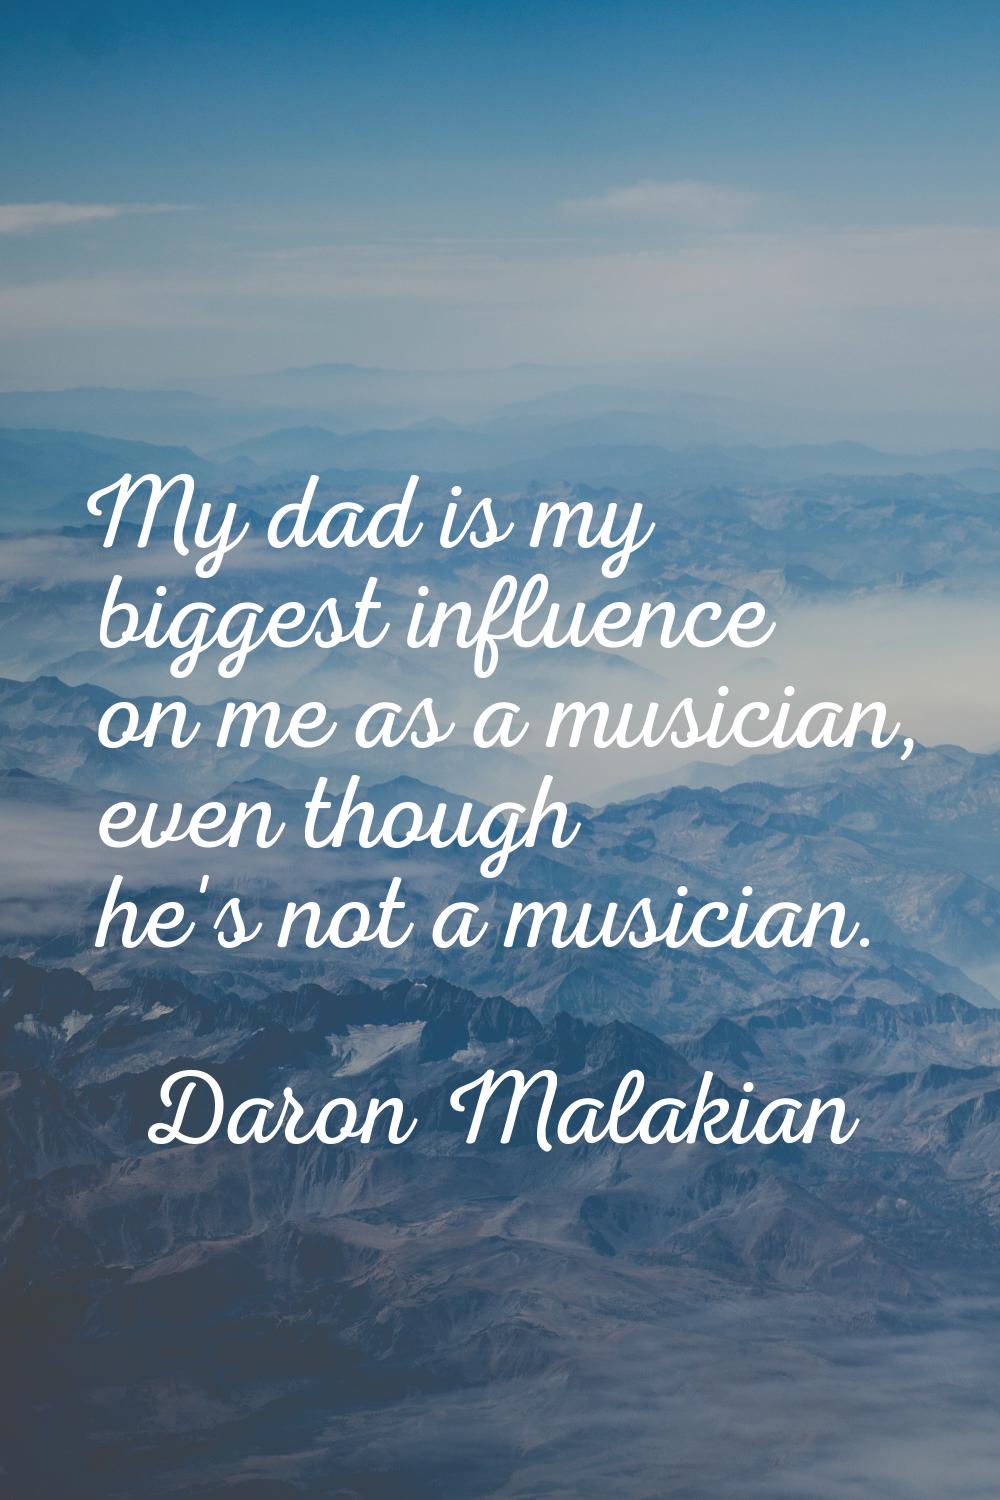 My dad is my biggest influence on me as a musician, even though he's not a musician.